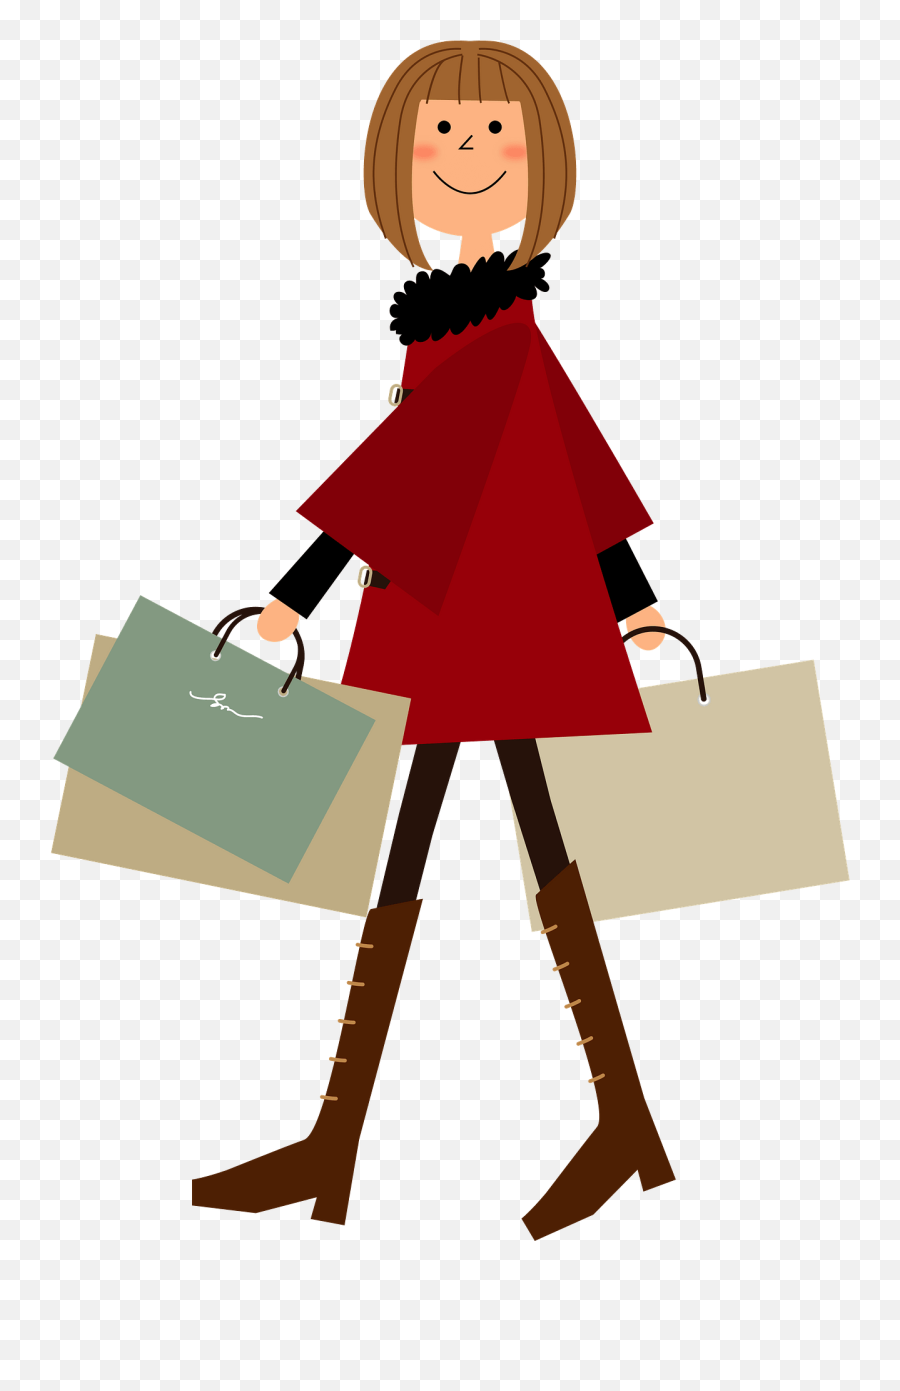 Woman With Shopping Bags Clipart Free Download Transparent Emoji,Shopping Bag Clipart